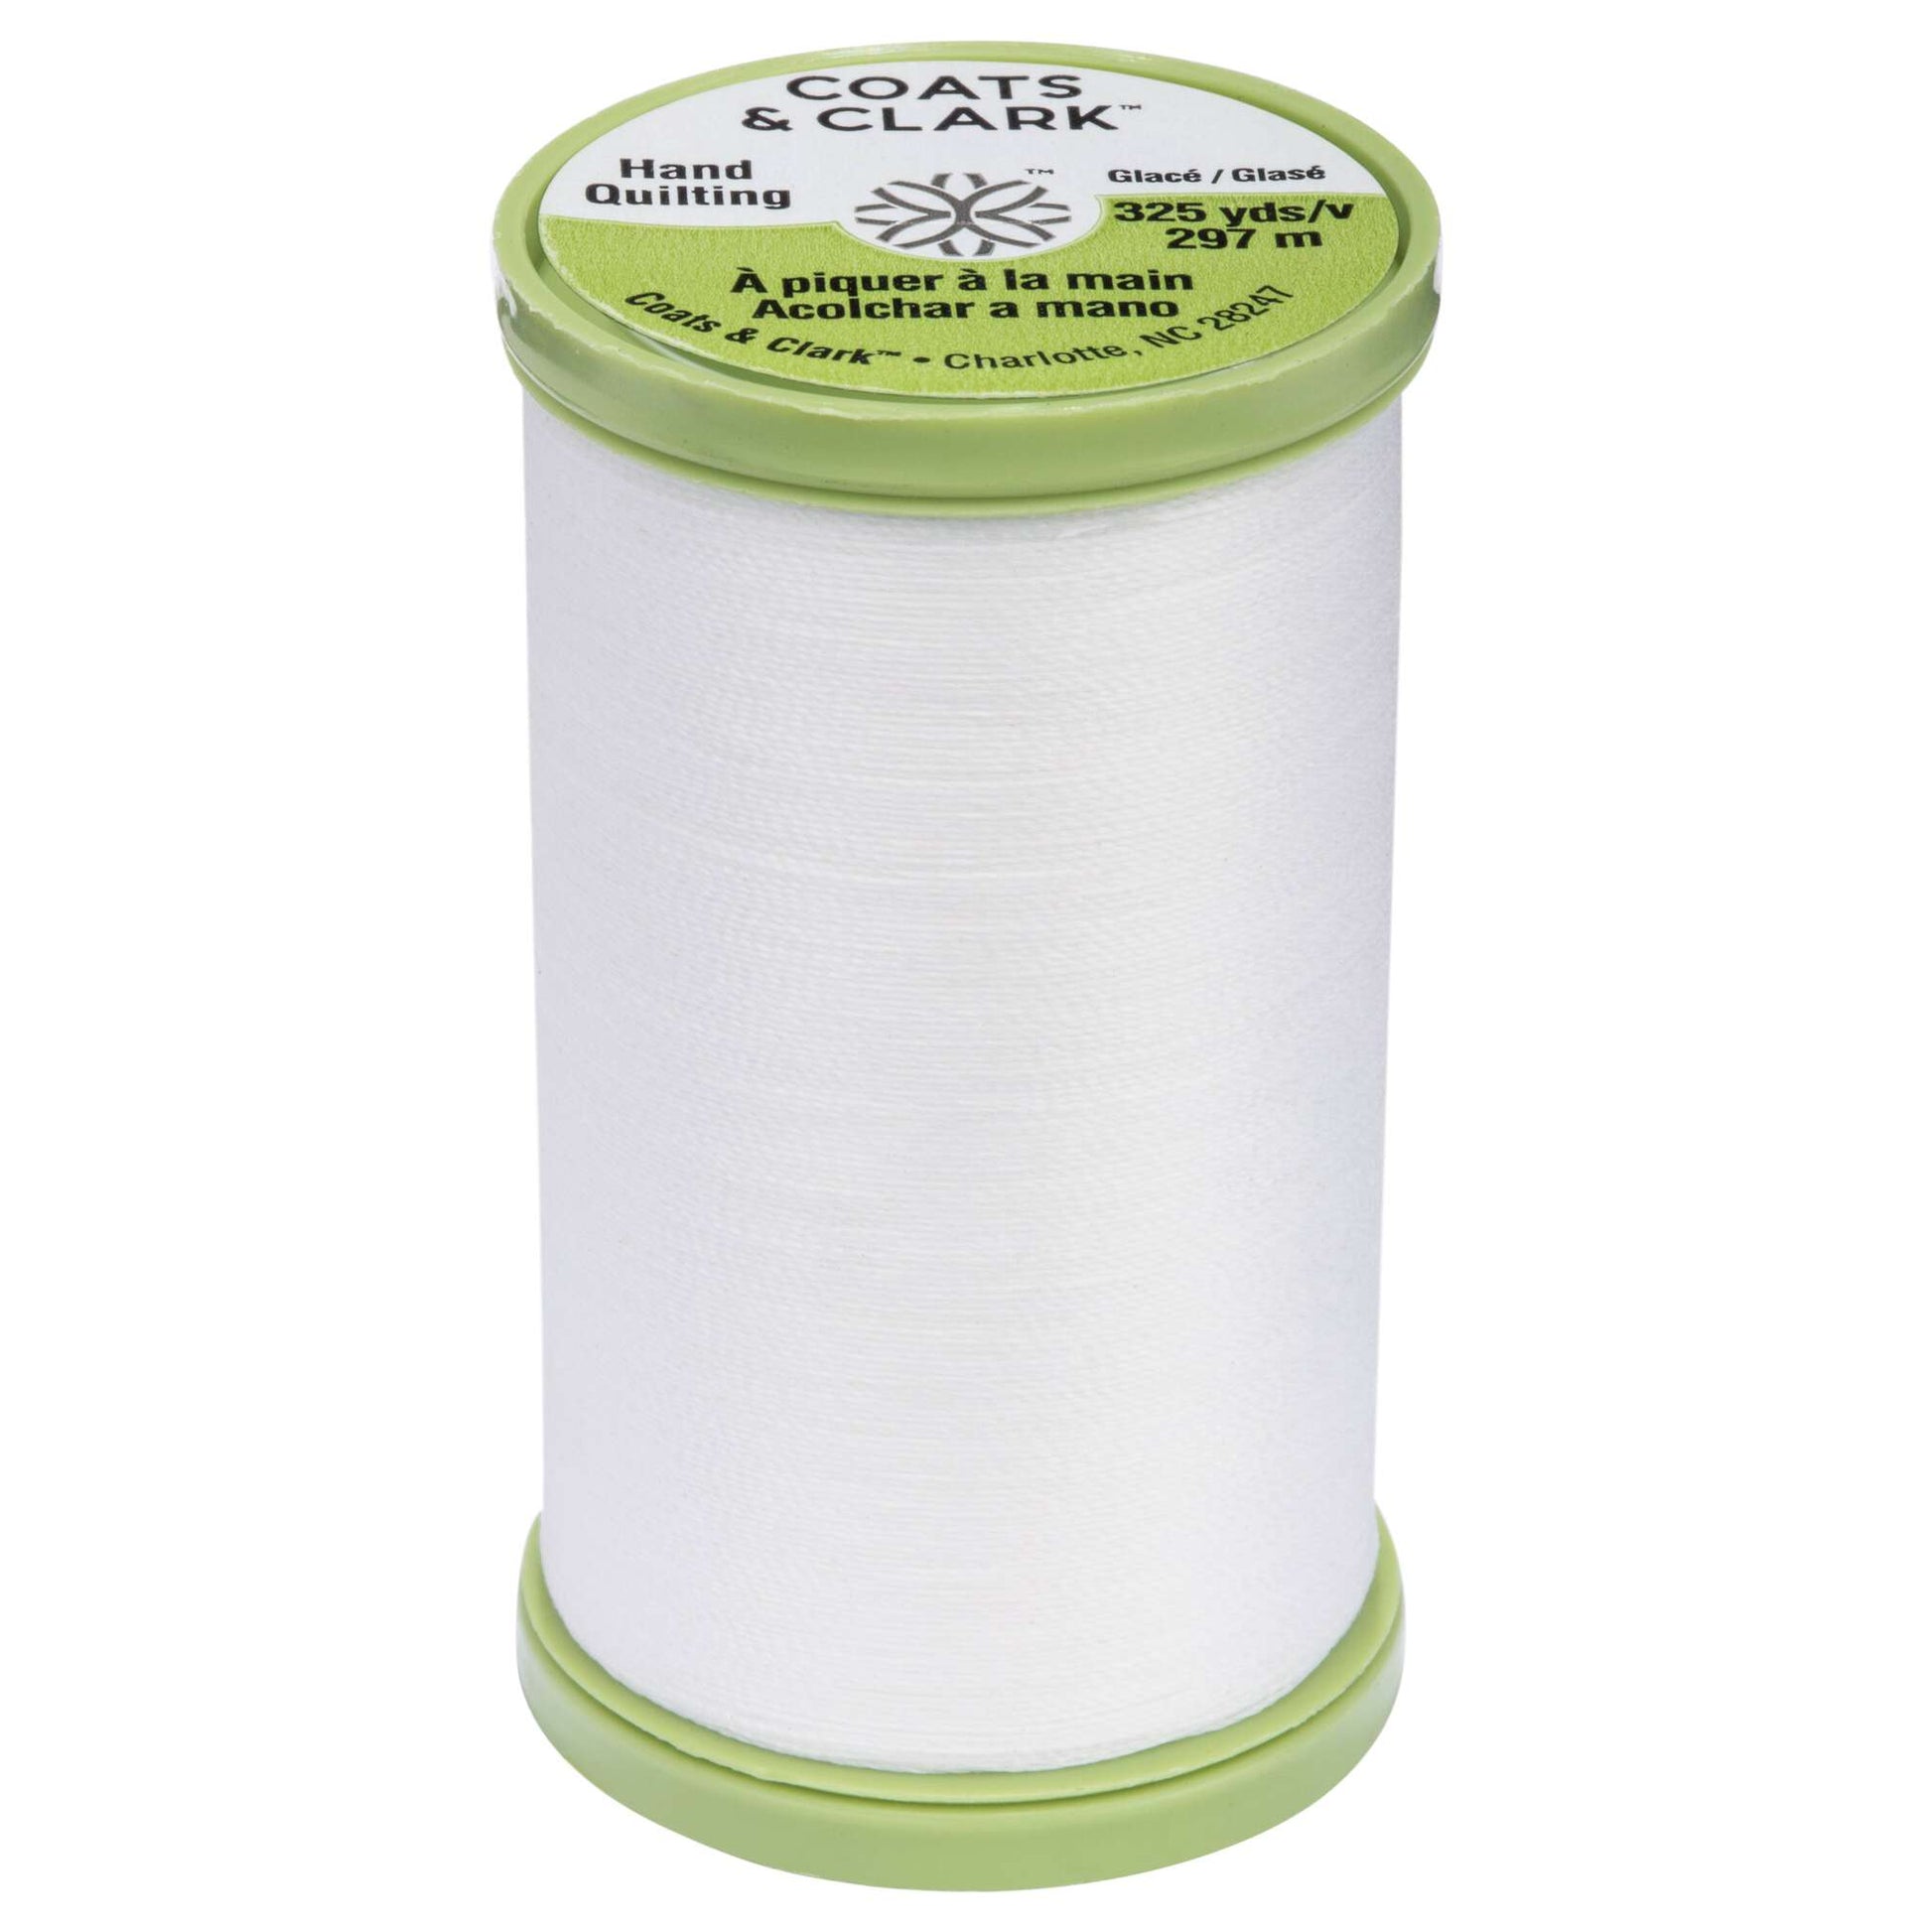 Dual Duty Plus Hand Quilting Thread (250 Yards) - Discontinued Items